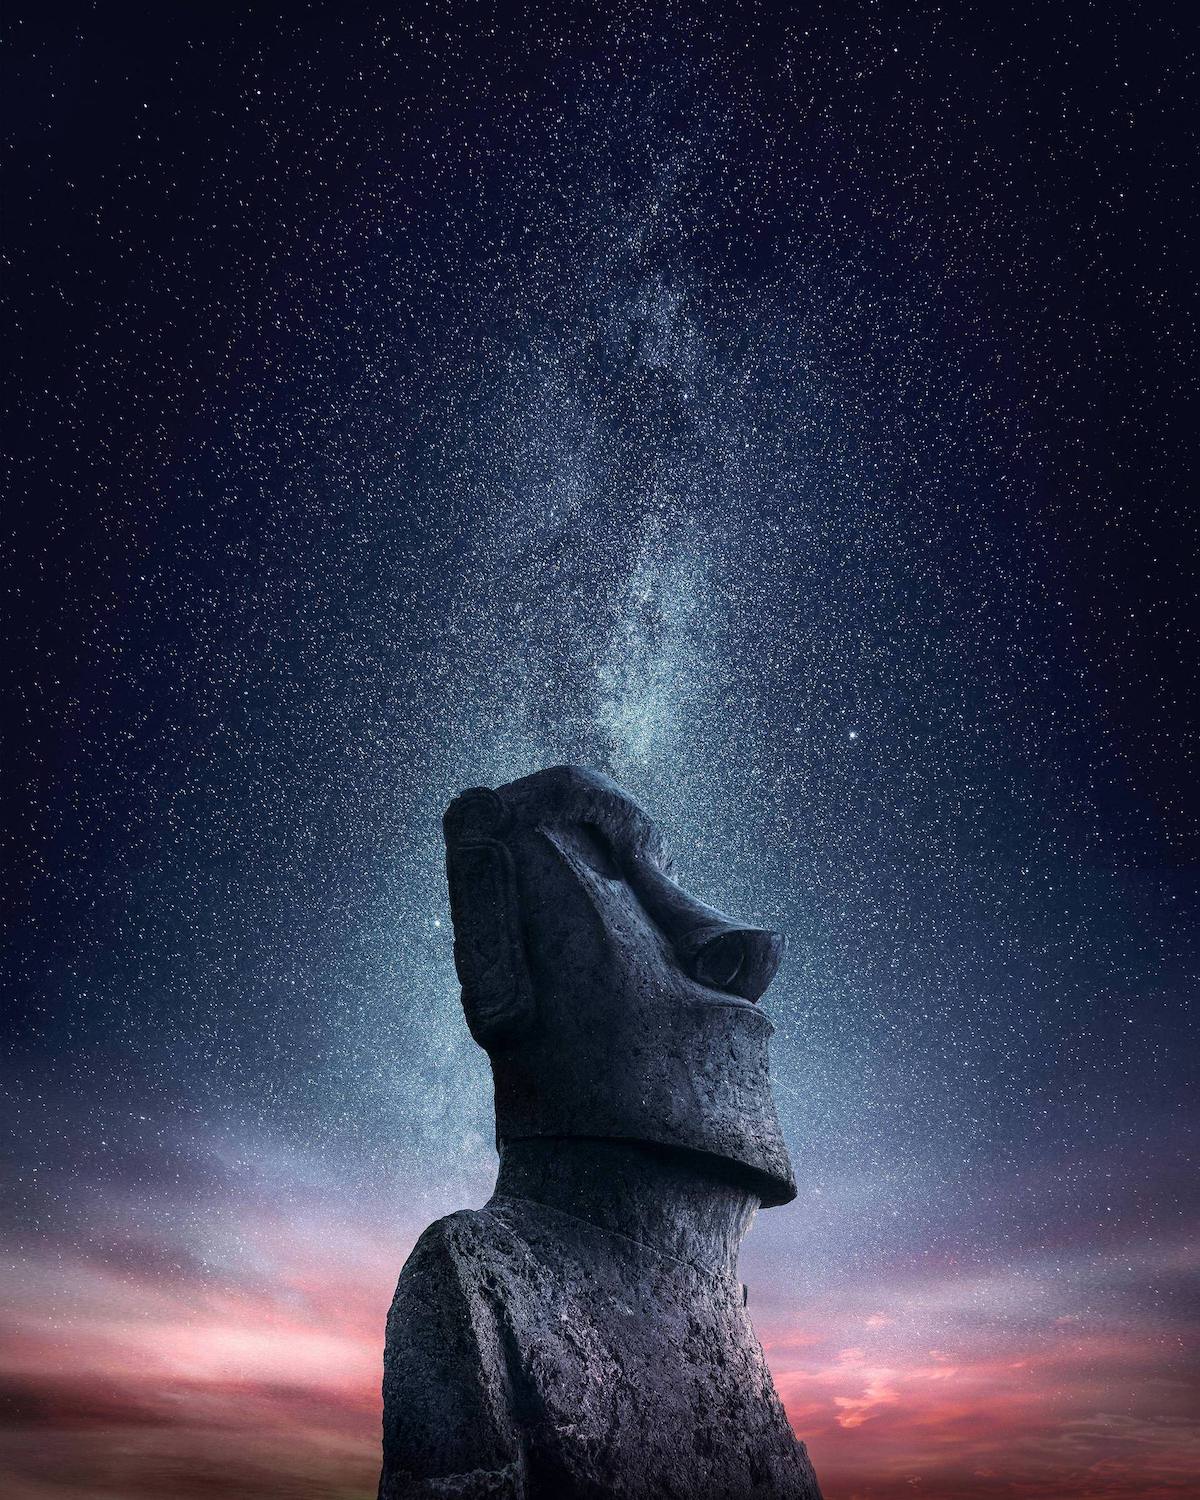 Composite of Milky Way Over Easter Island Heads